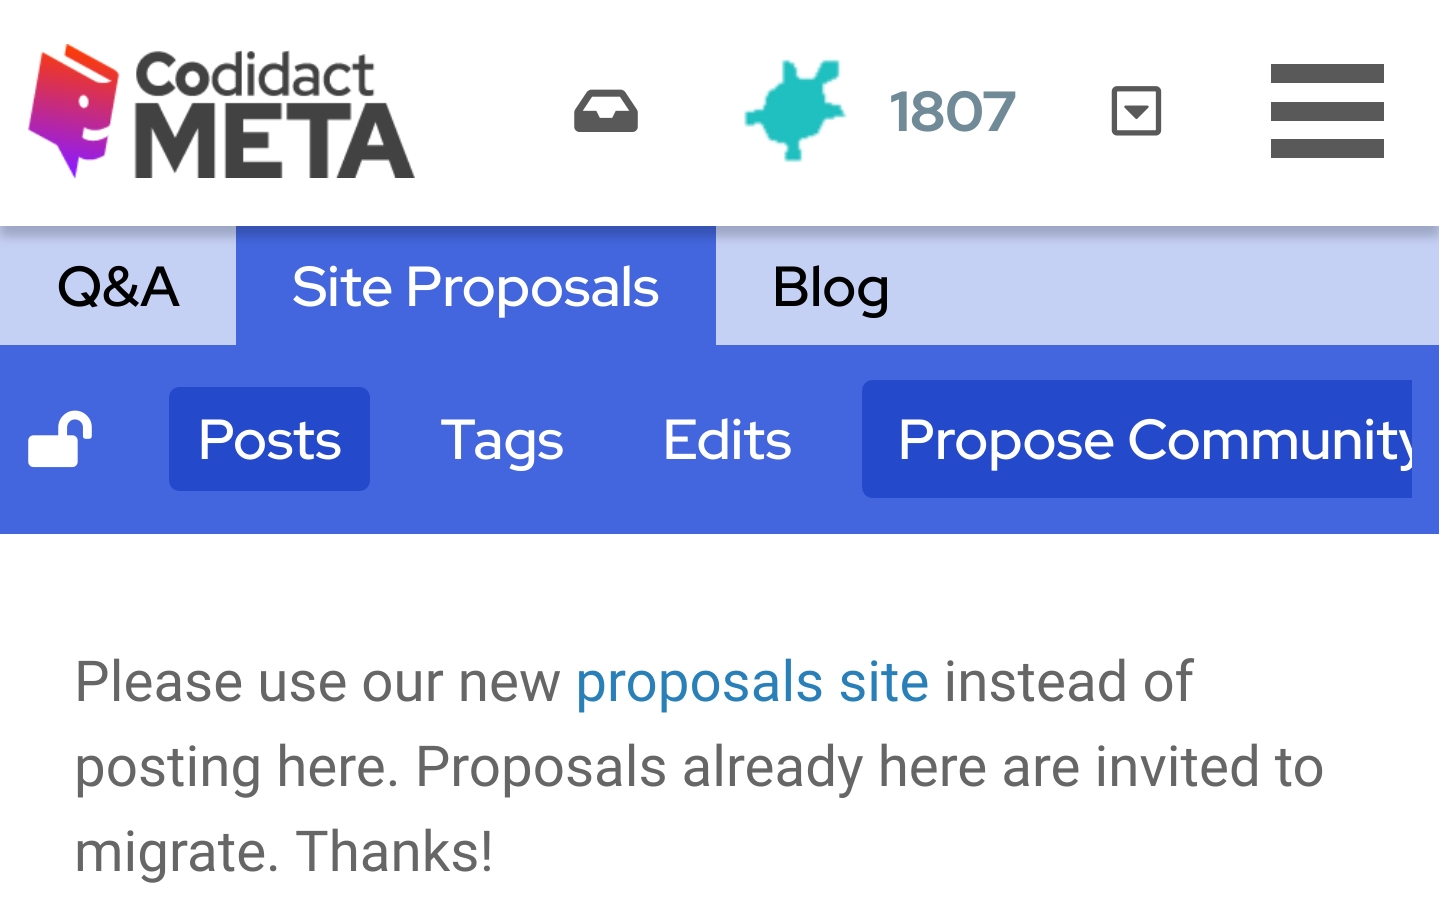 Site Proposals category showing a link in the description